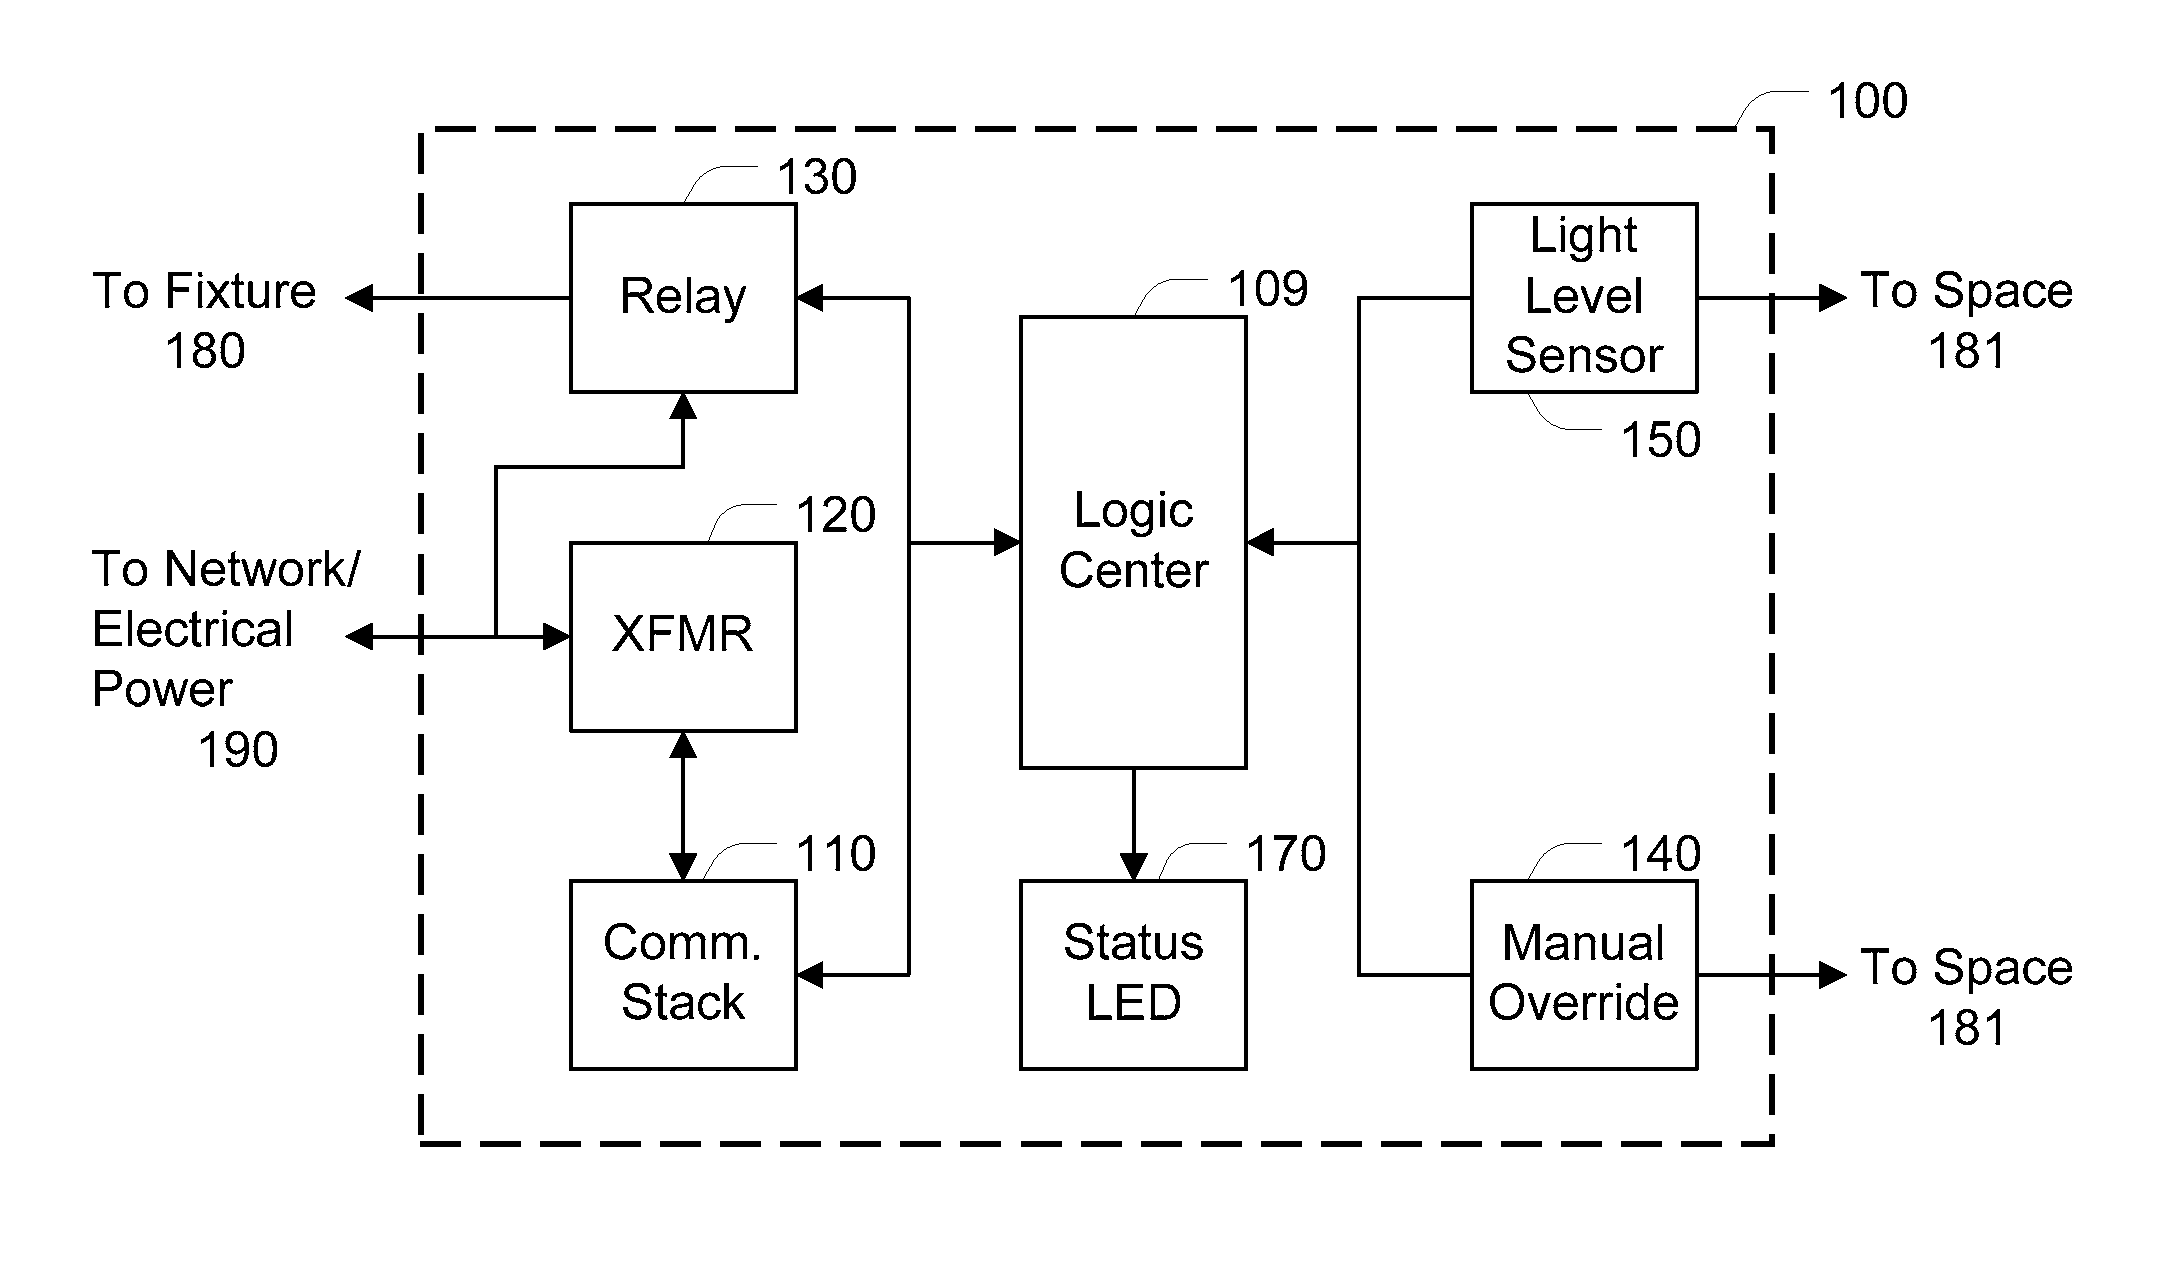 Lighting control switch apparatus and system